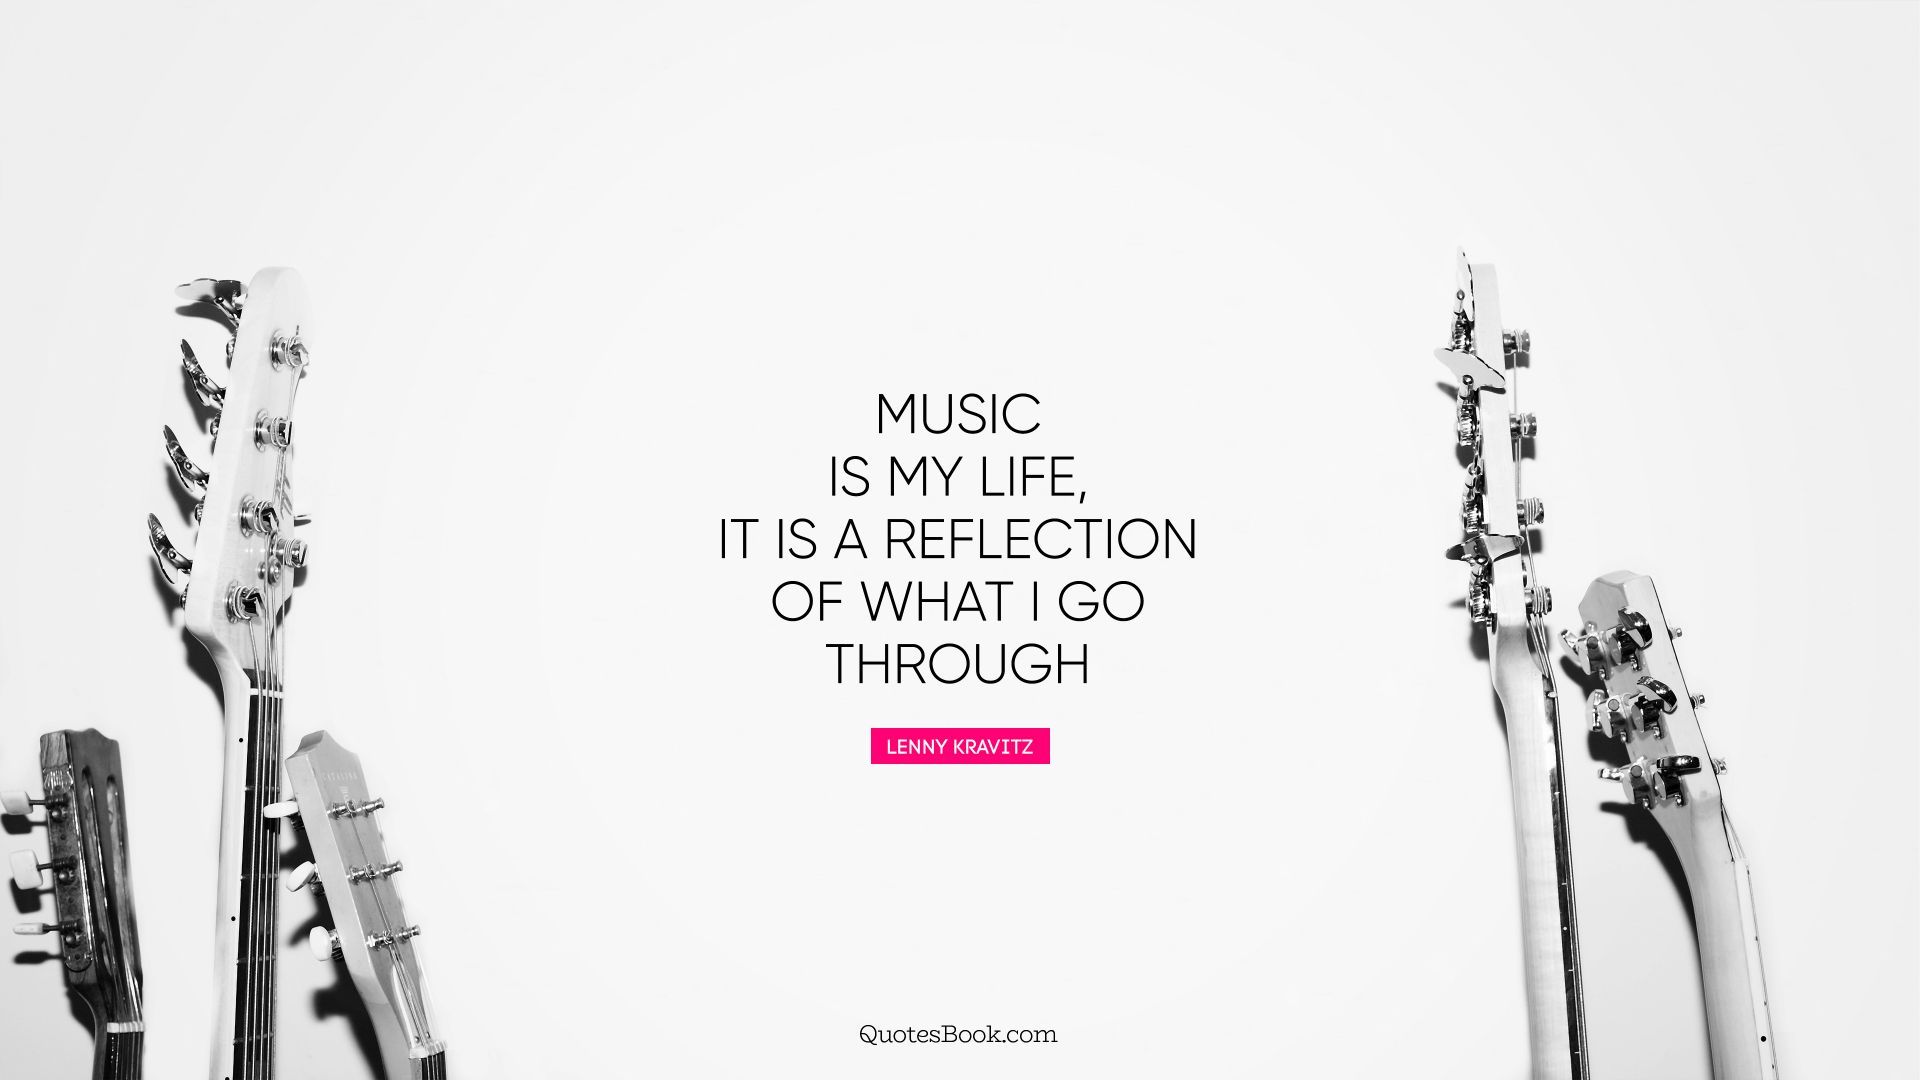 Music is my life, it is a reflection of what I go through. - Quote by Lenny Kravitz